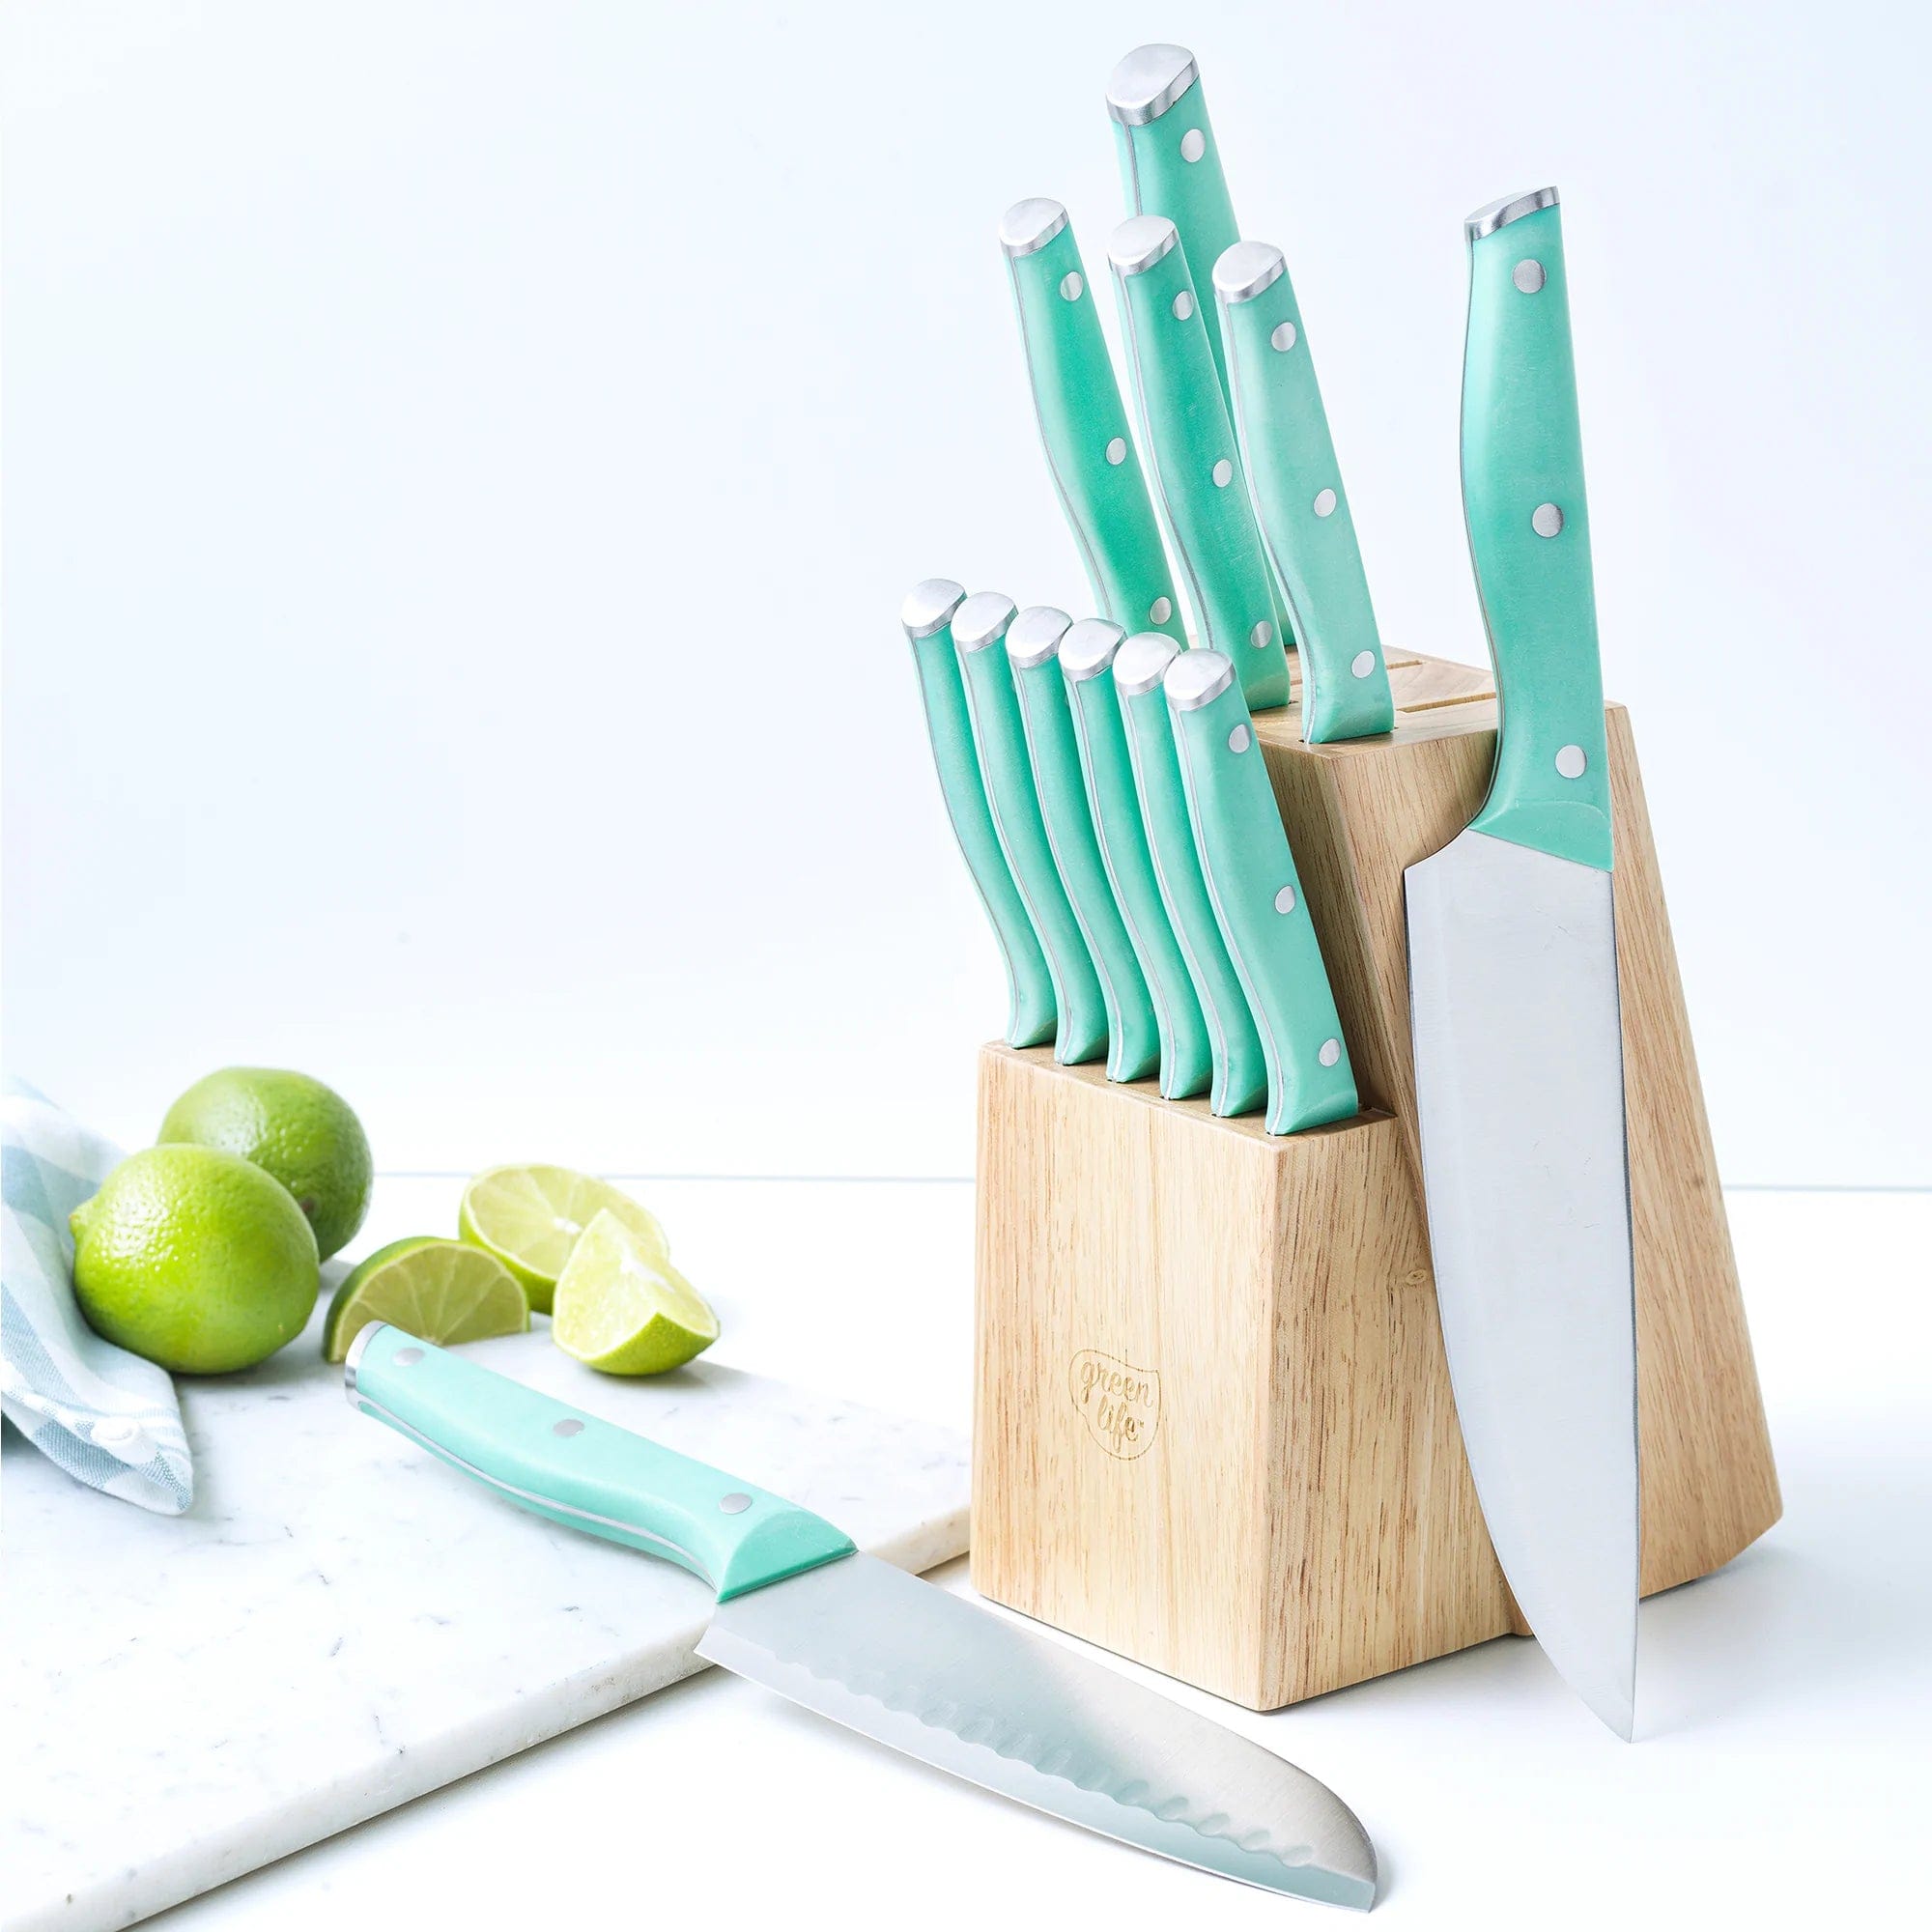 13 Piece GreenLife High-Carbon Stainless Knife Block Cutlery Set